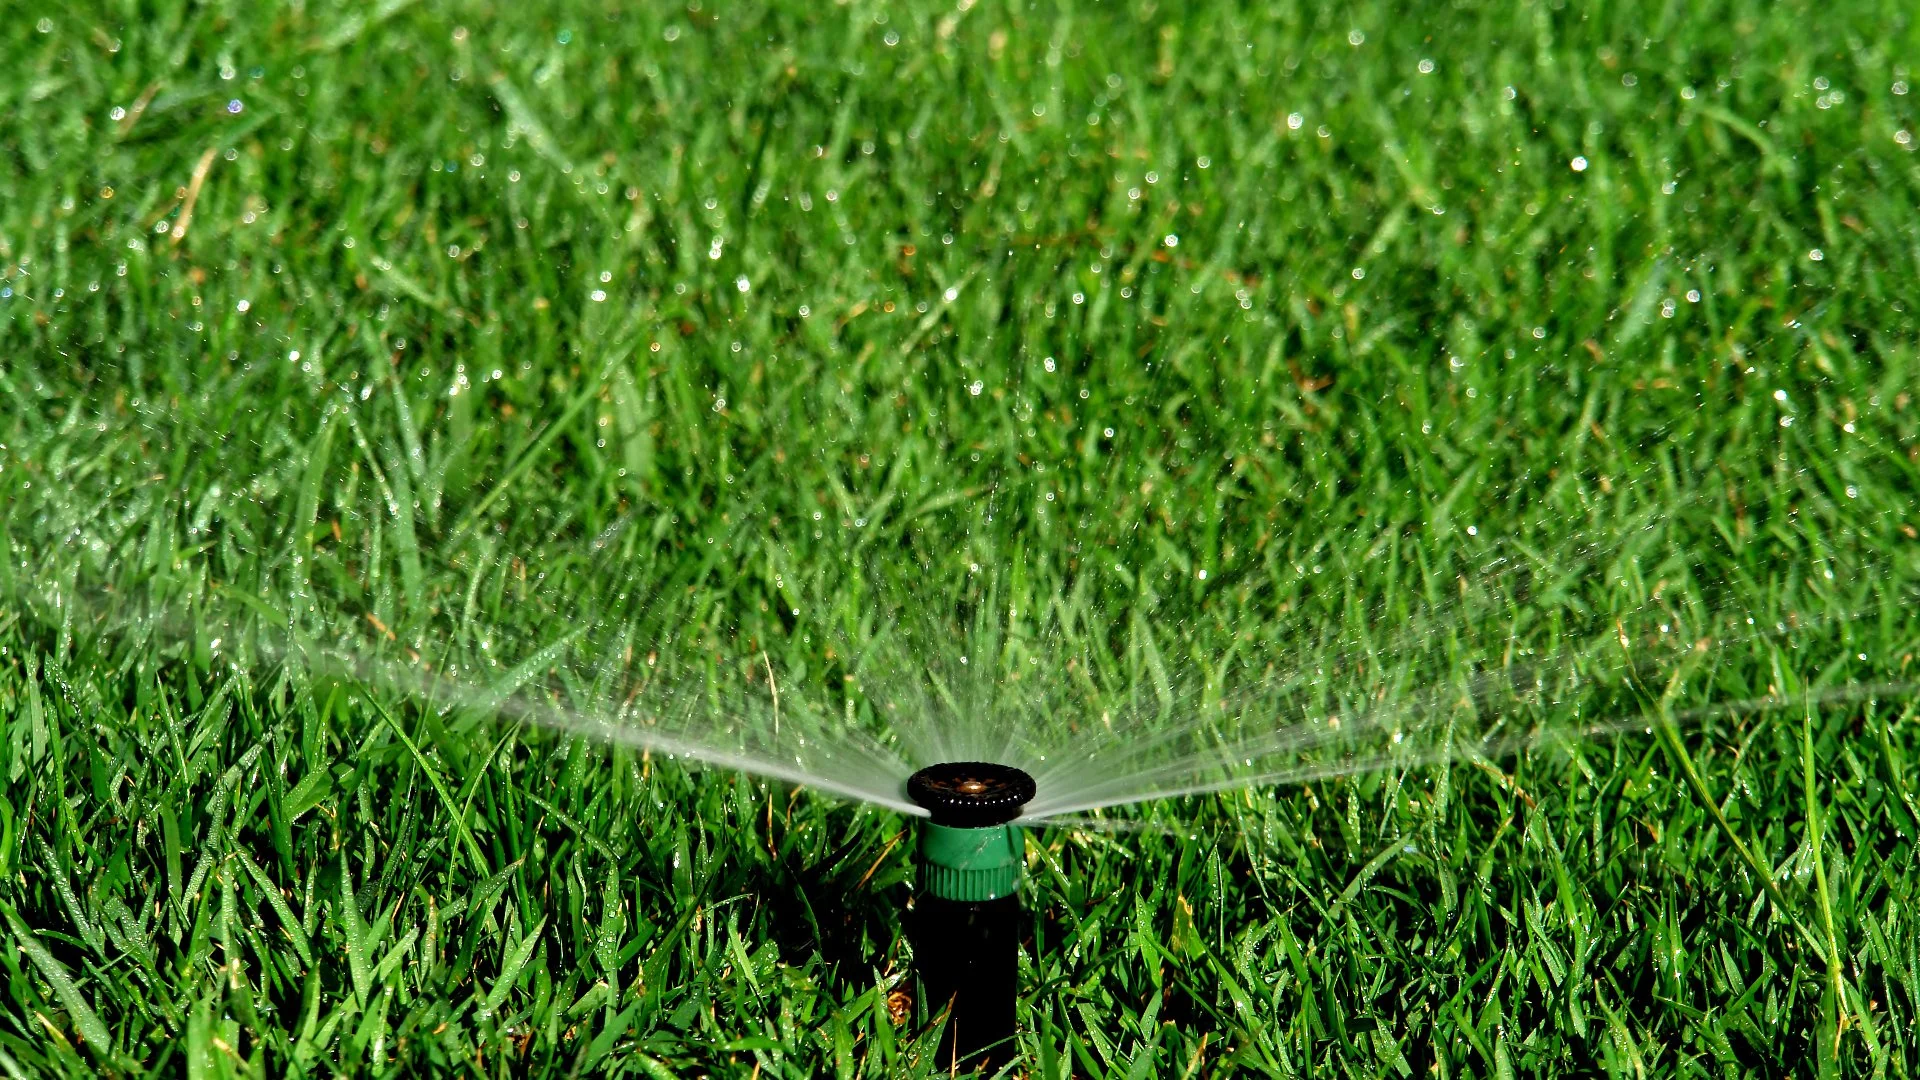 Drip Irrigation vs Sprinkler System - Which Is Right for Your Property?